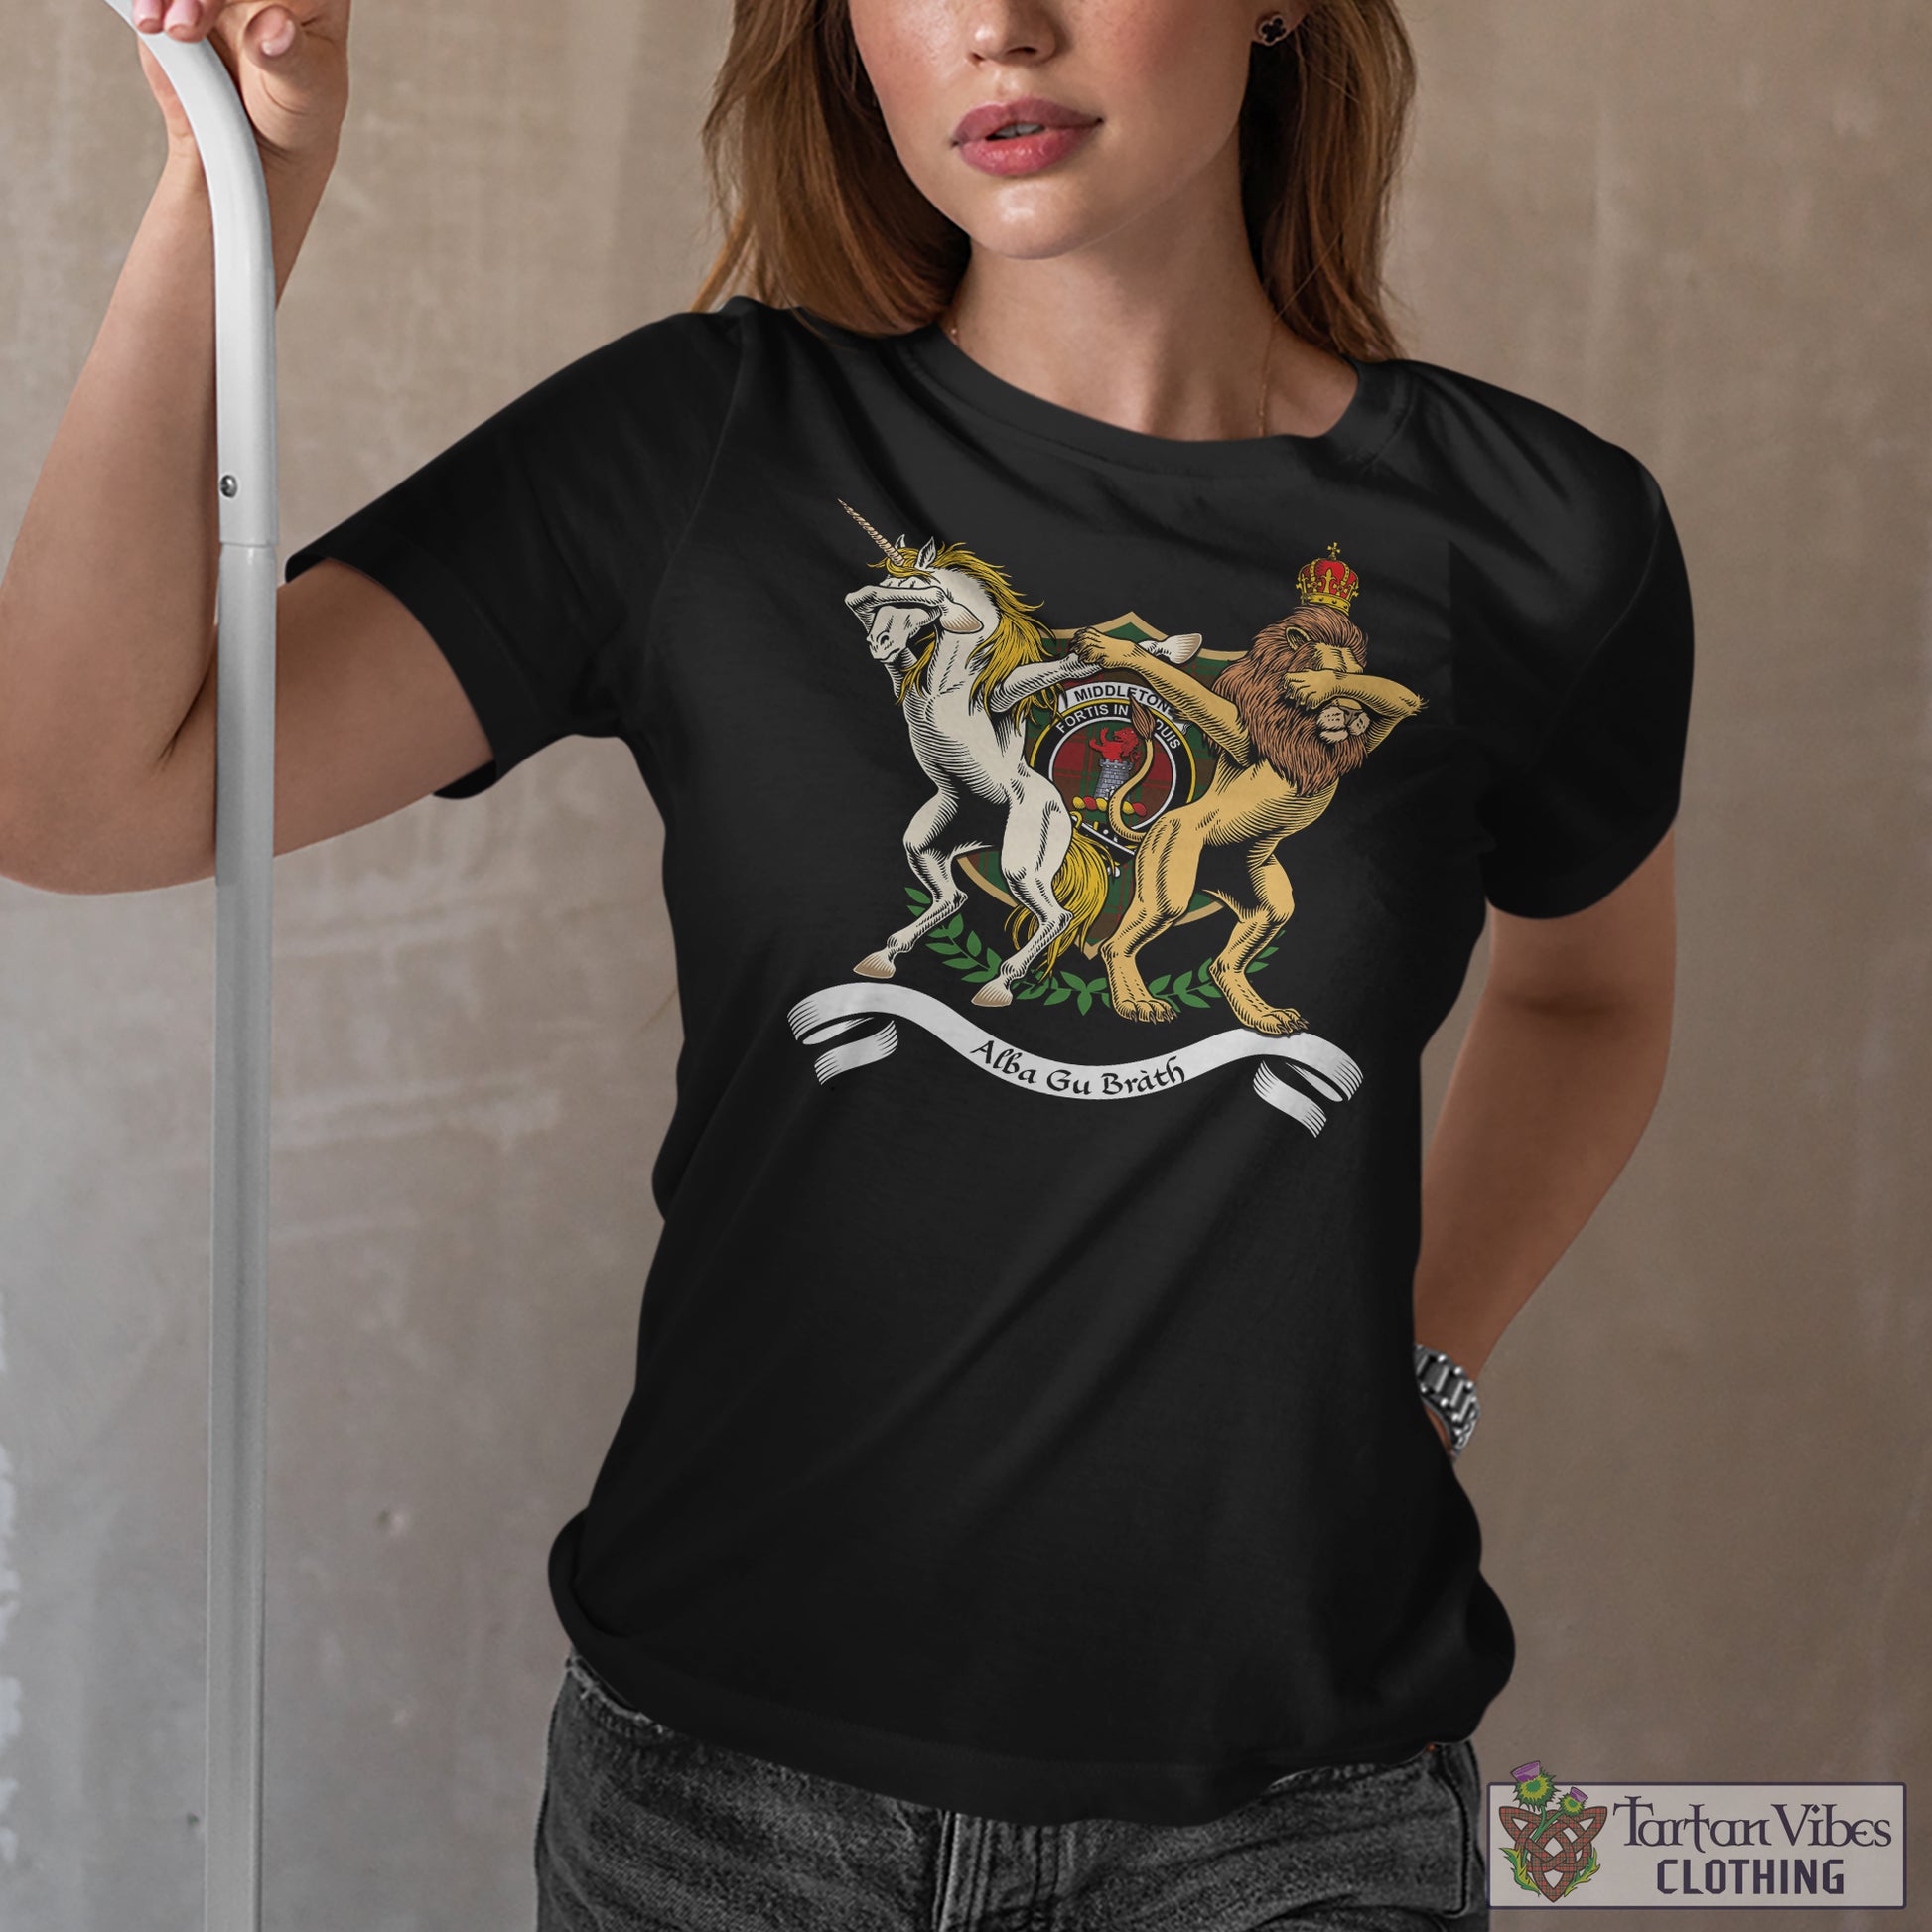 Tartan Vibes Clothing Middleton Family Crest Cotton Women's T-Shirt with Scotland Royal Coat Of Arm Funny Style